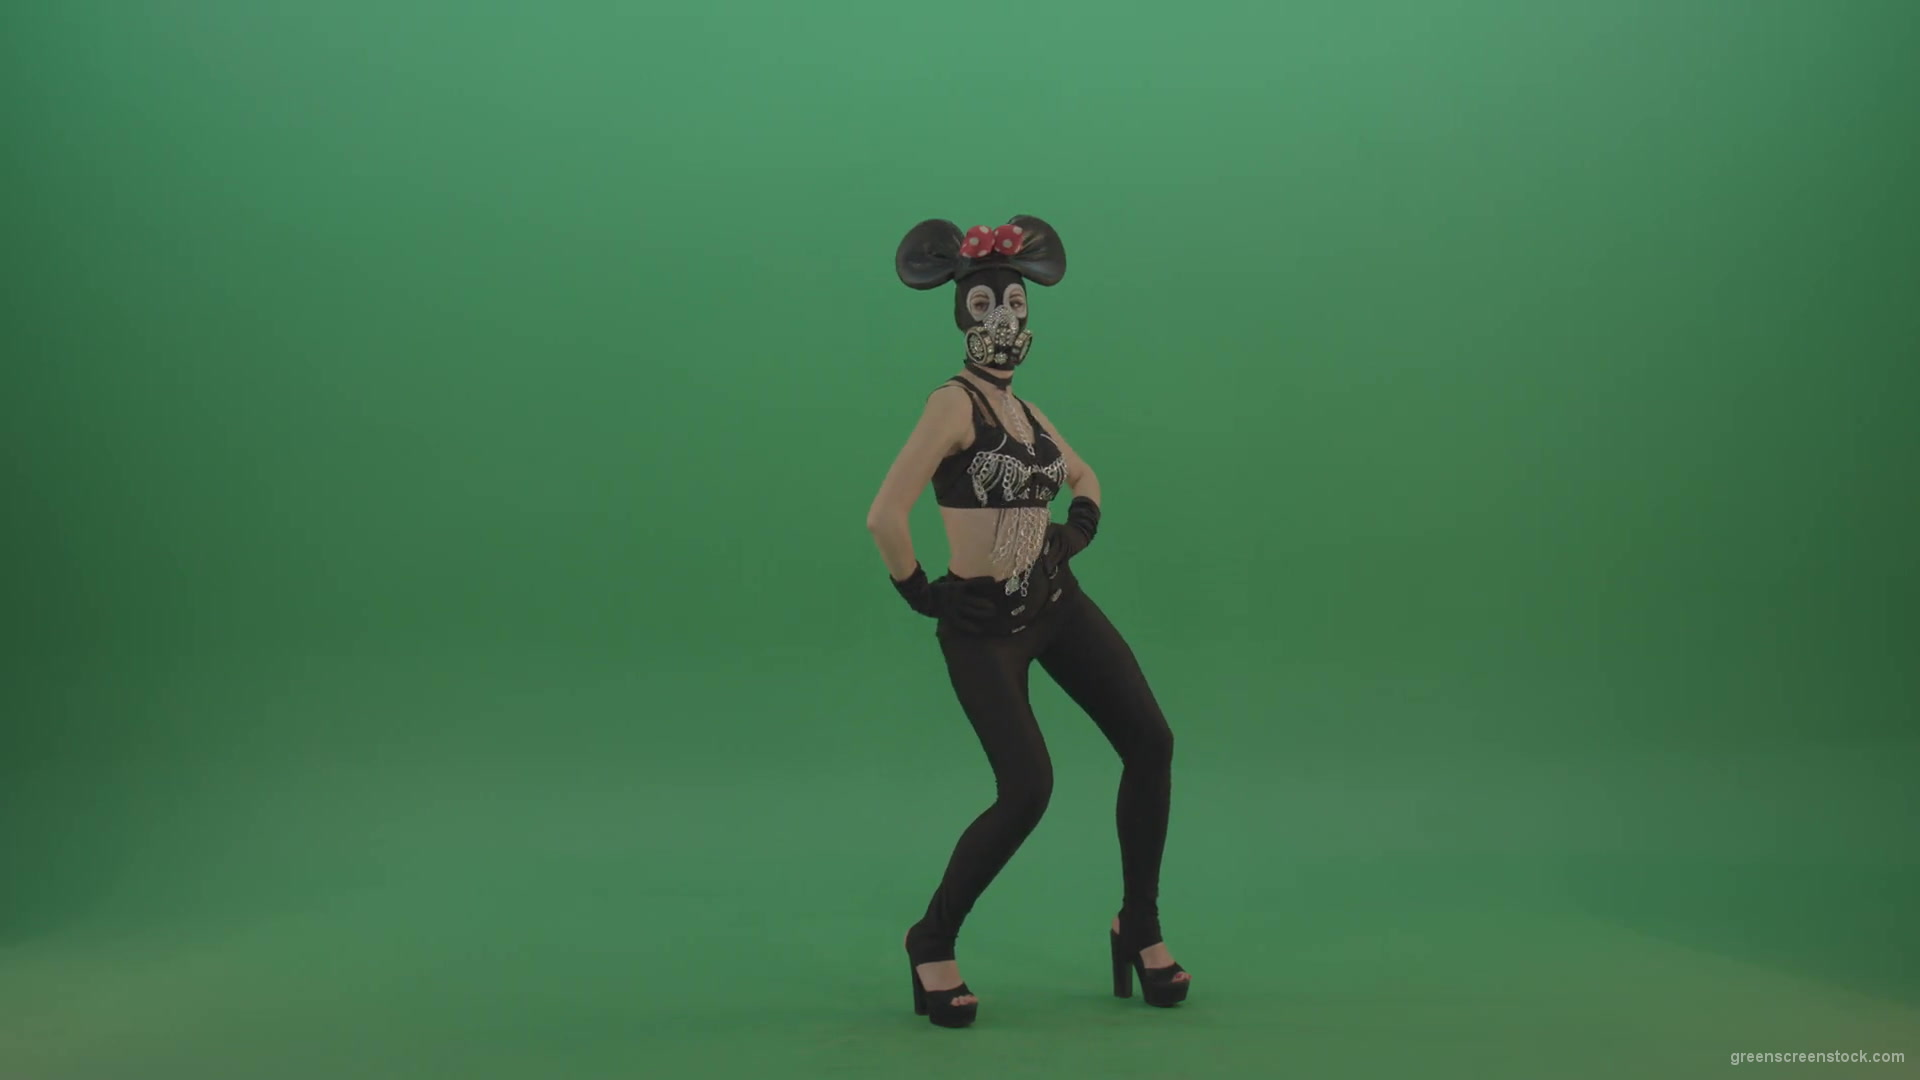 Sexy-dancing-mouse-girl-slowly-dance-in-mask-on-green-screen-1920_004 Green Screen Stock